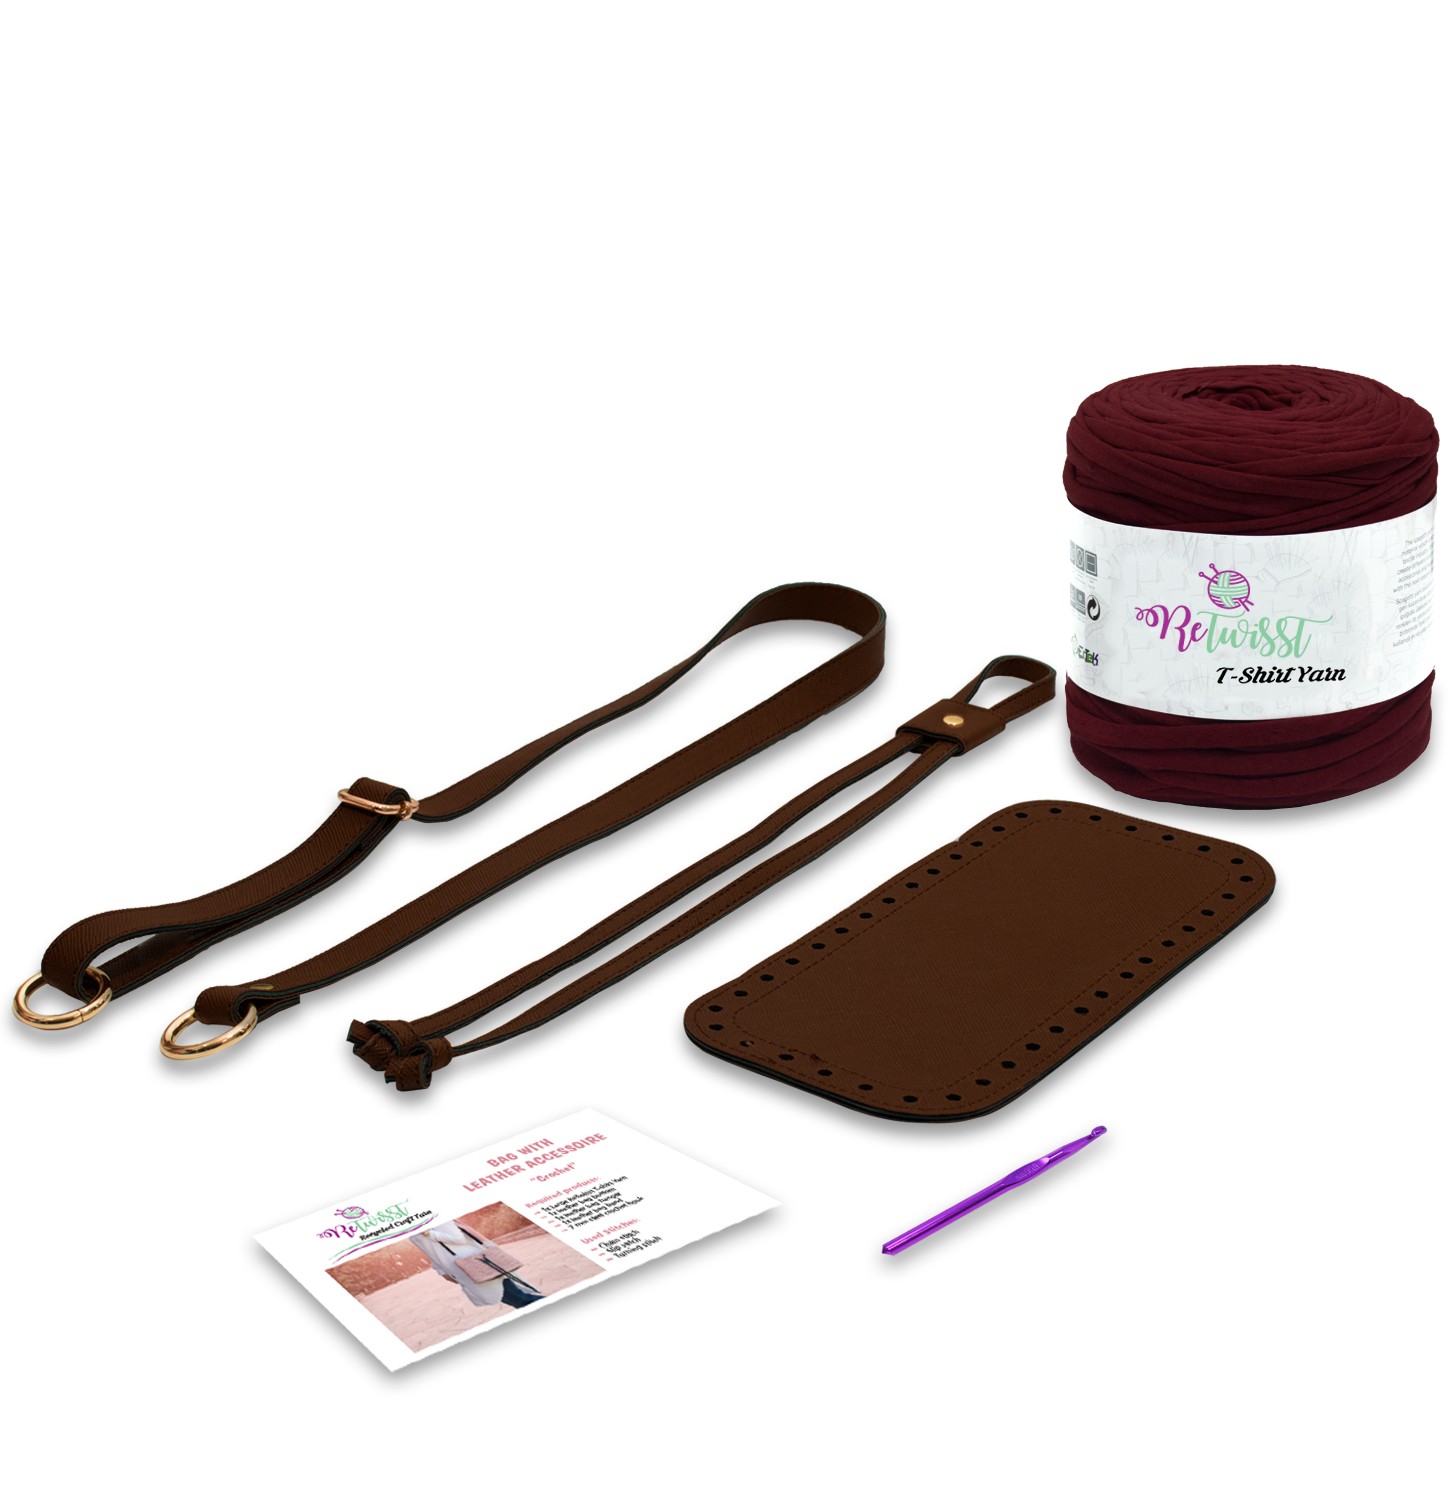 DIY BAGWITH FAUX LEATHER ACCESSOIRES KIT